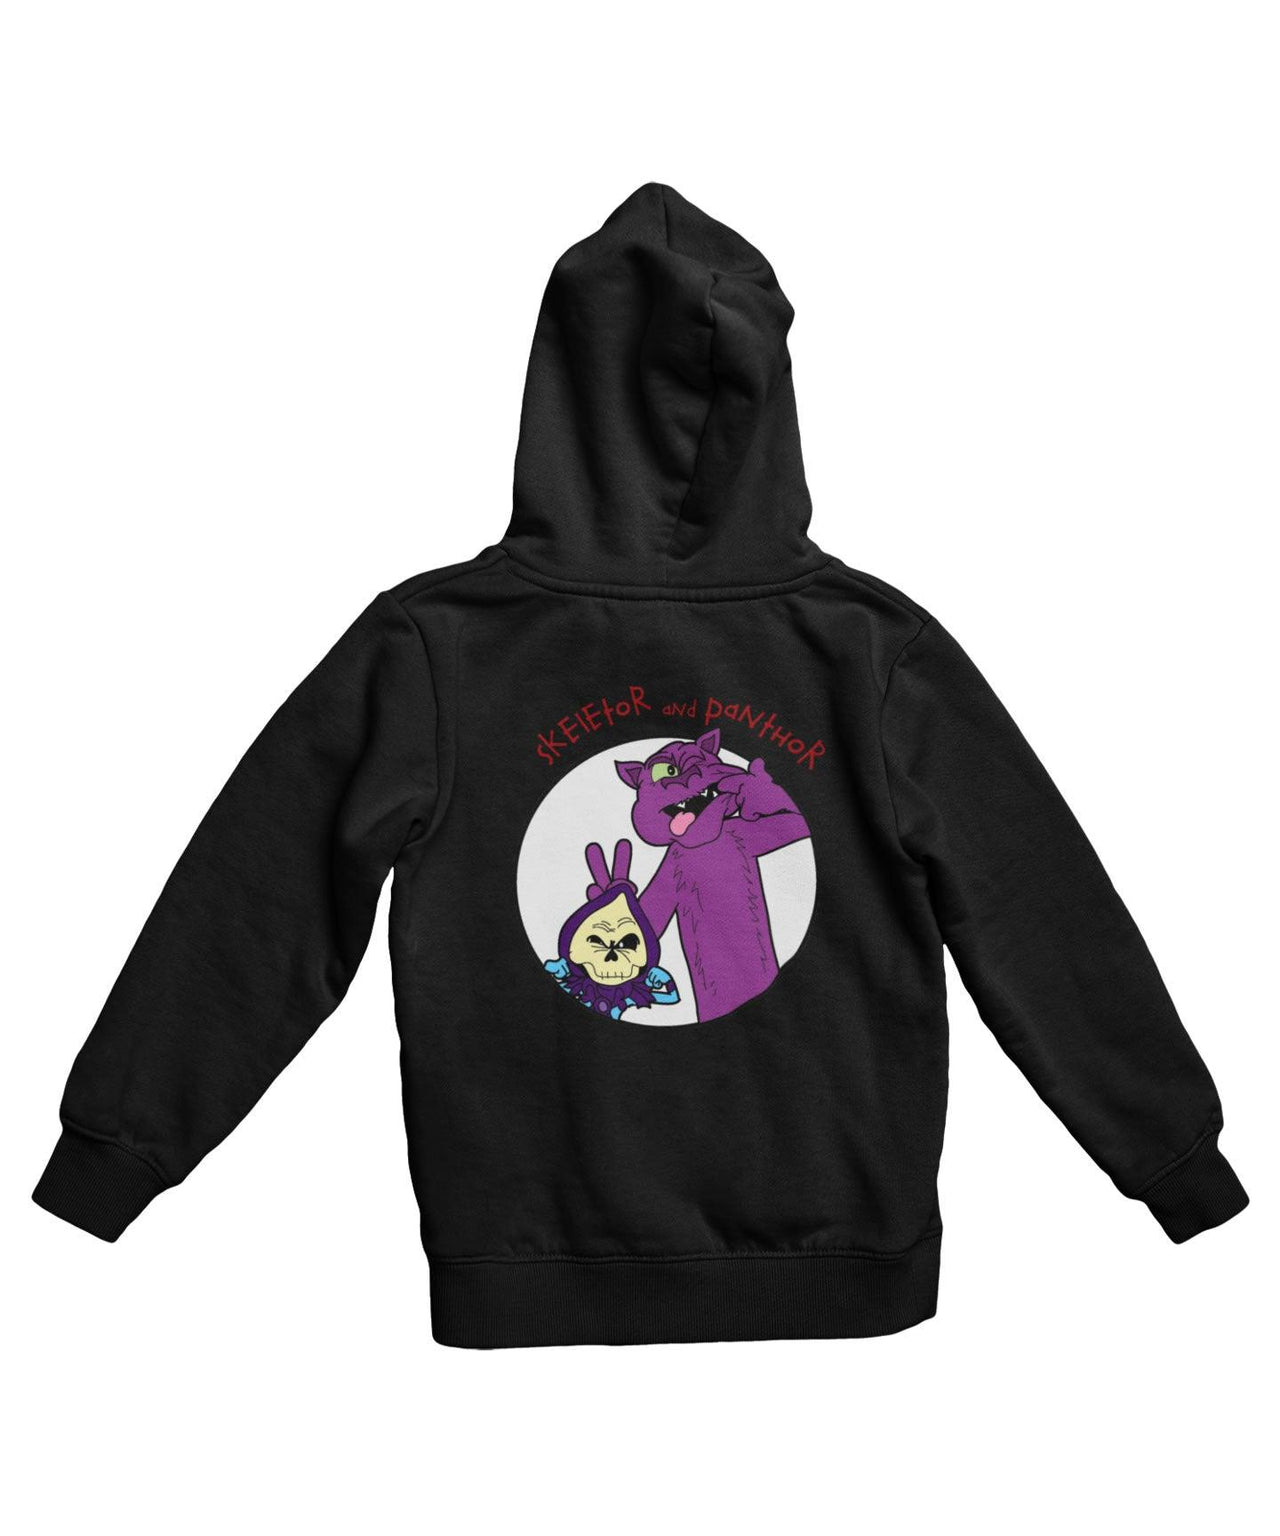 Top Notchy Skeletor and Panther Back Printed Unisex Hoodie 8Ball